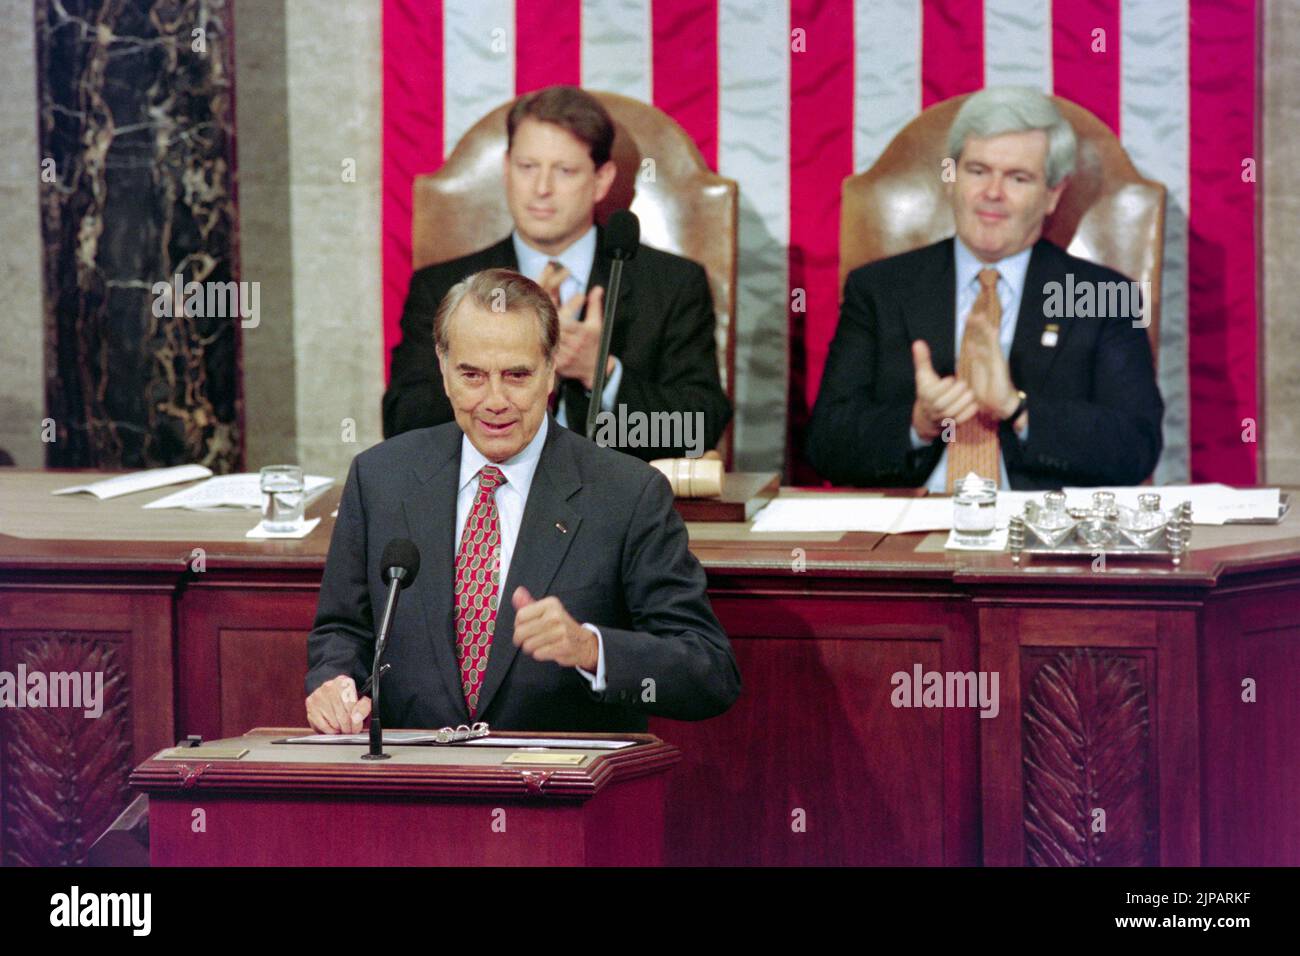 U.S. Senate Majority leader Bob Dole of Kansas, addresses a Joint Session of Congress to close the commemoration of the 50th anniversary of World War II as Vice President Al Gore and Speaker Newt Gingrich of Georgia look on at Capitol Hill, October 11, 1995 in Washington, D.C. Stock Photo